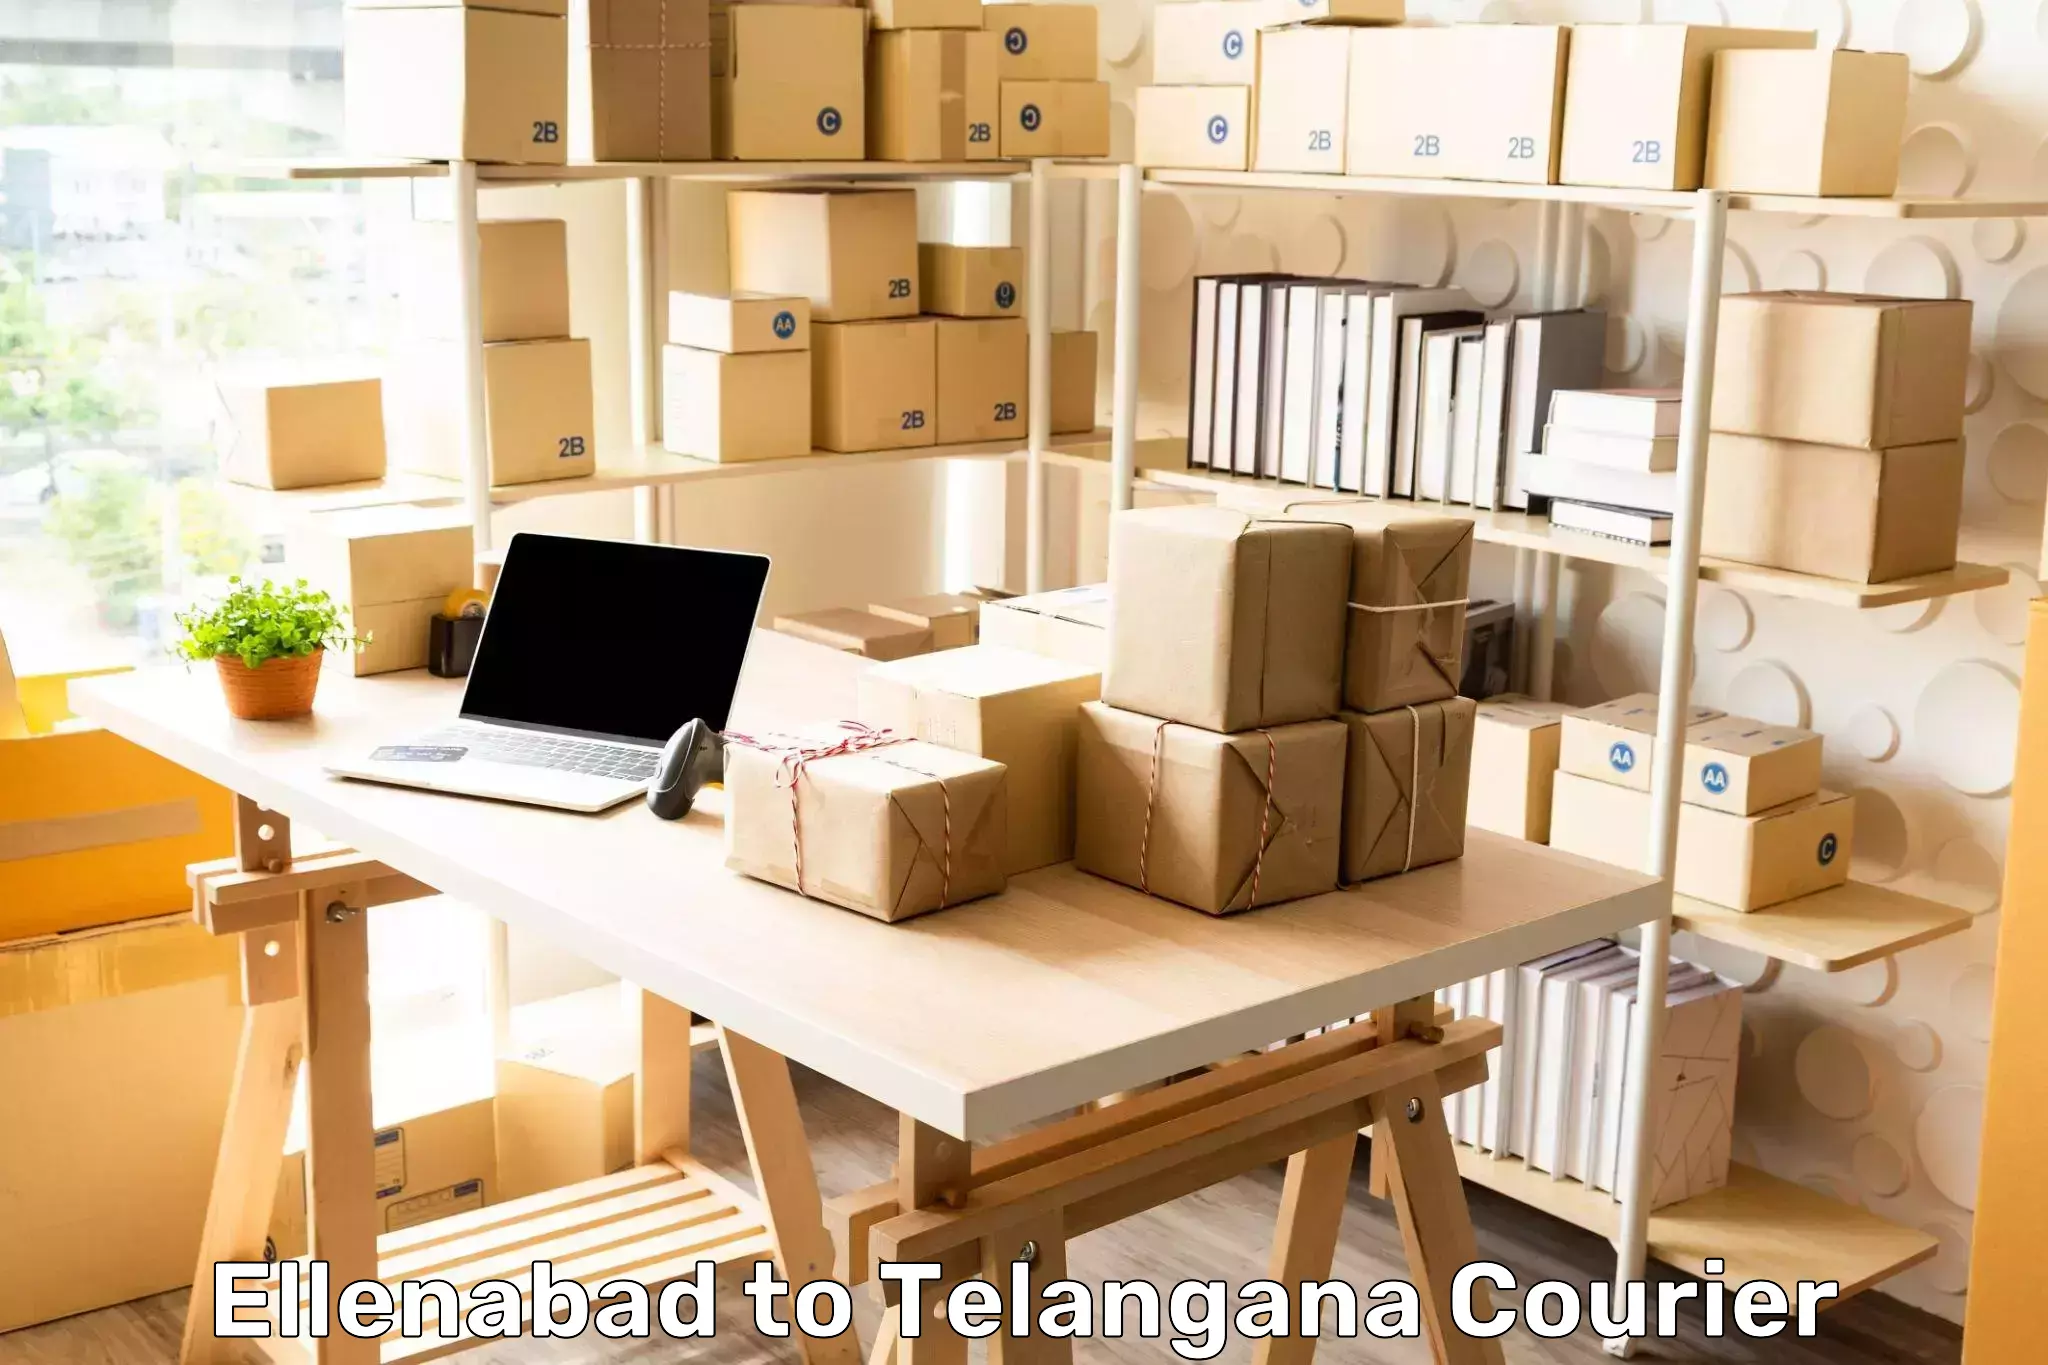 Large-scale shipping solutions Ellenabad to Hyderabad